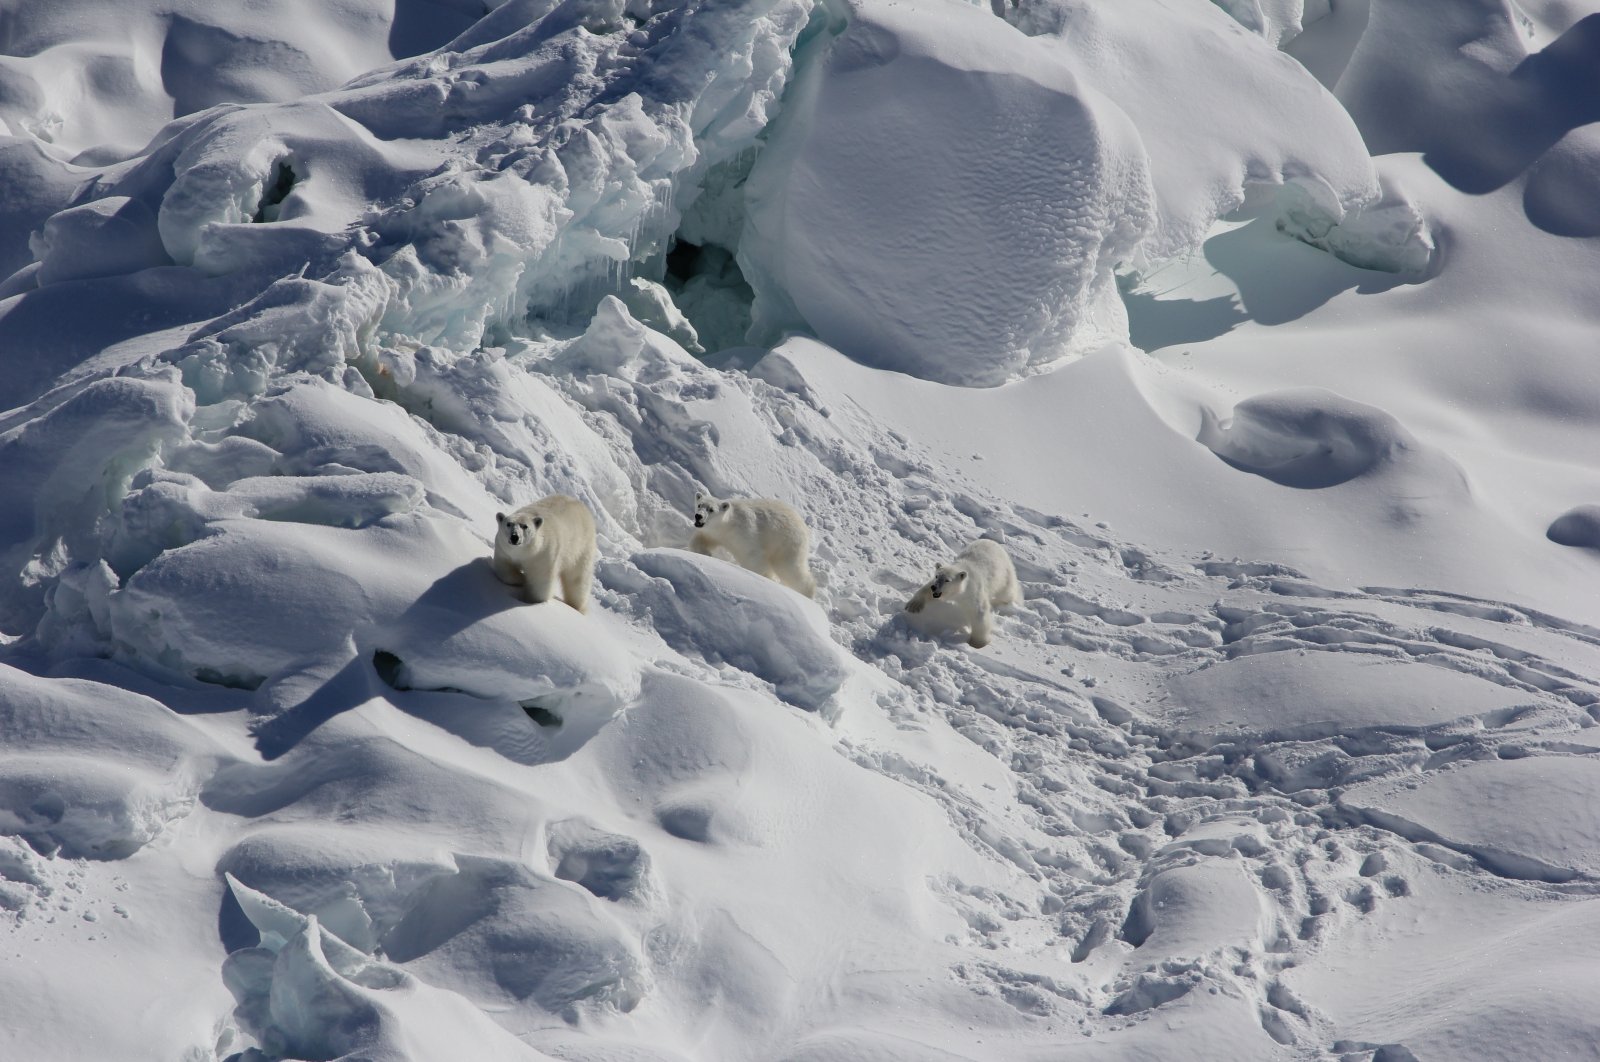 An adult female polar bear (L) and two 1-year-old cubs walk over snow-covered freshwater glacier ice in Southeast Greenland in March 2015. With limited sea ice, these Southeast Greenland polar bears use freshwater icebergs spawned from the shrinking Greenland ice sheet as makeshift hunting grounds, according to a study in the journal Science released on June 16, 2022. (AP Photo)